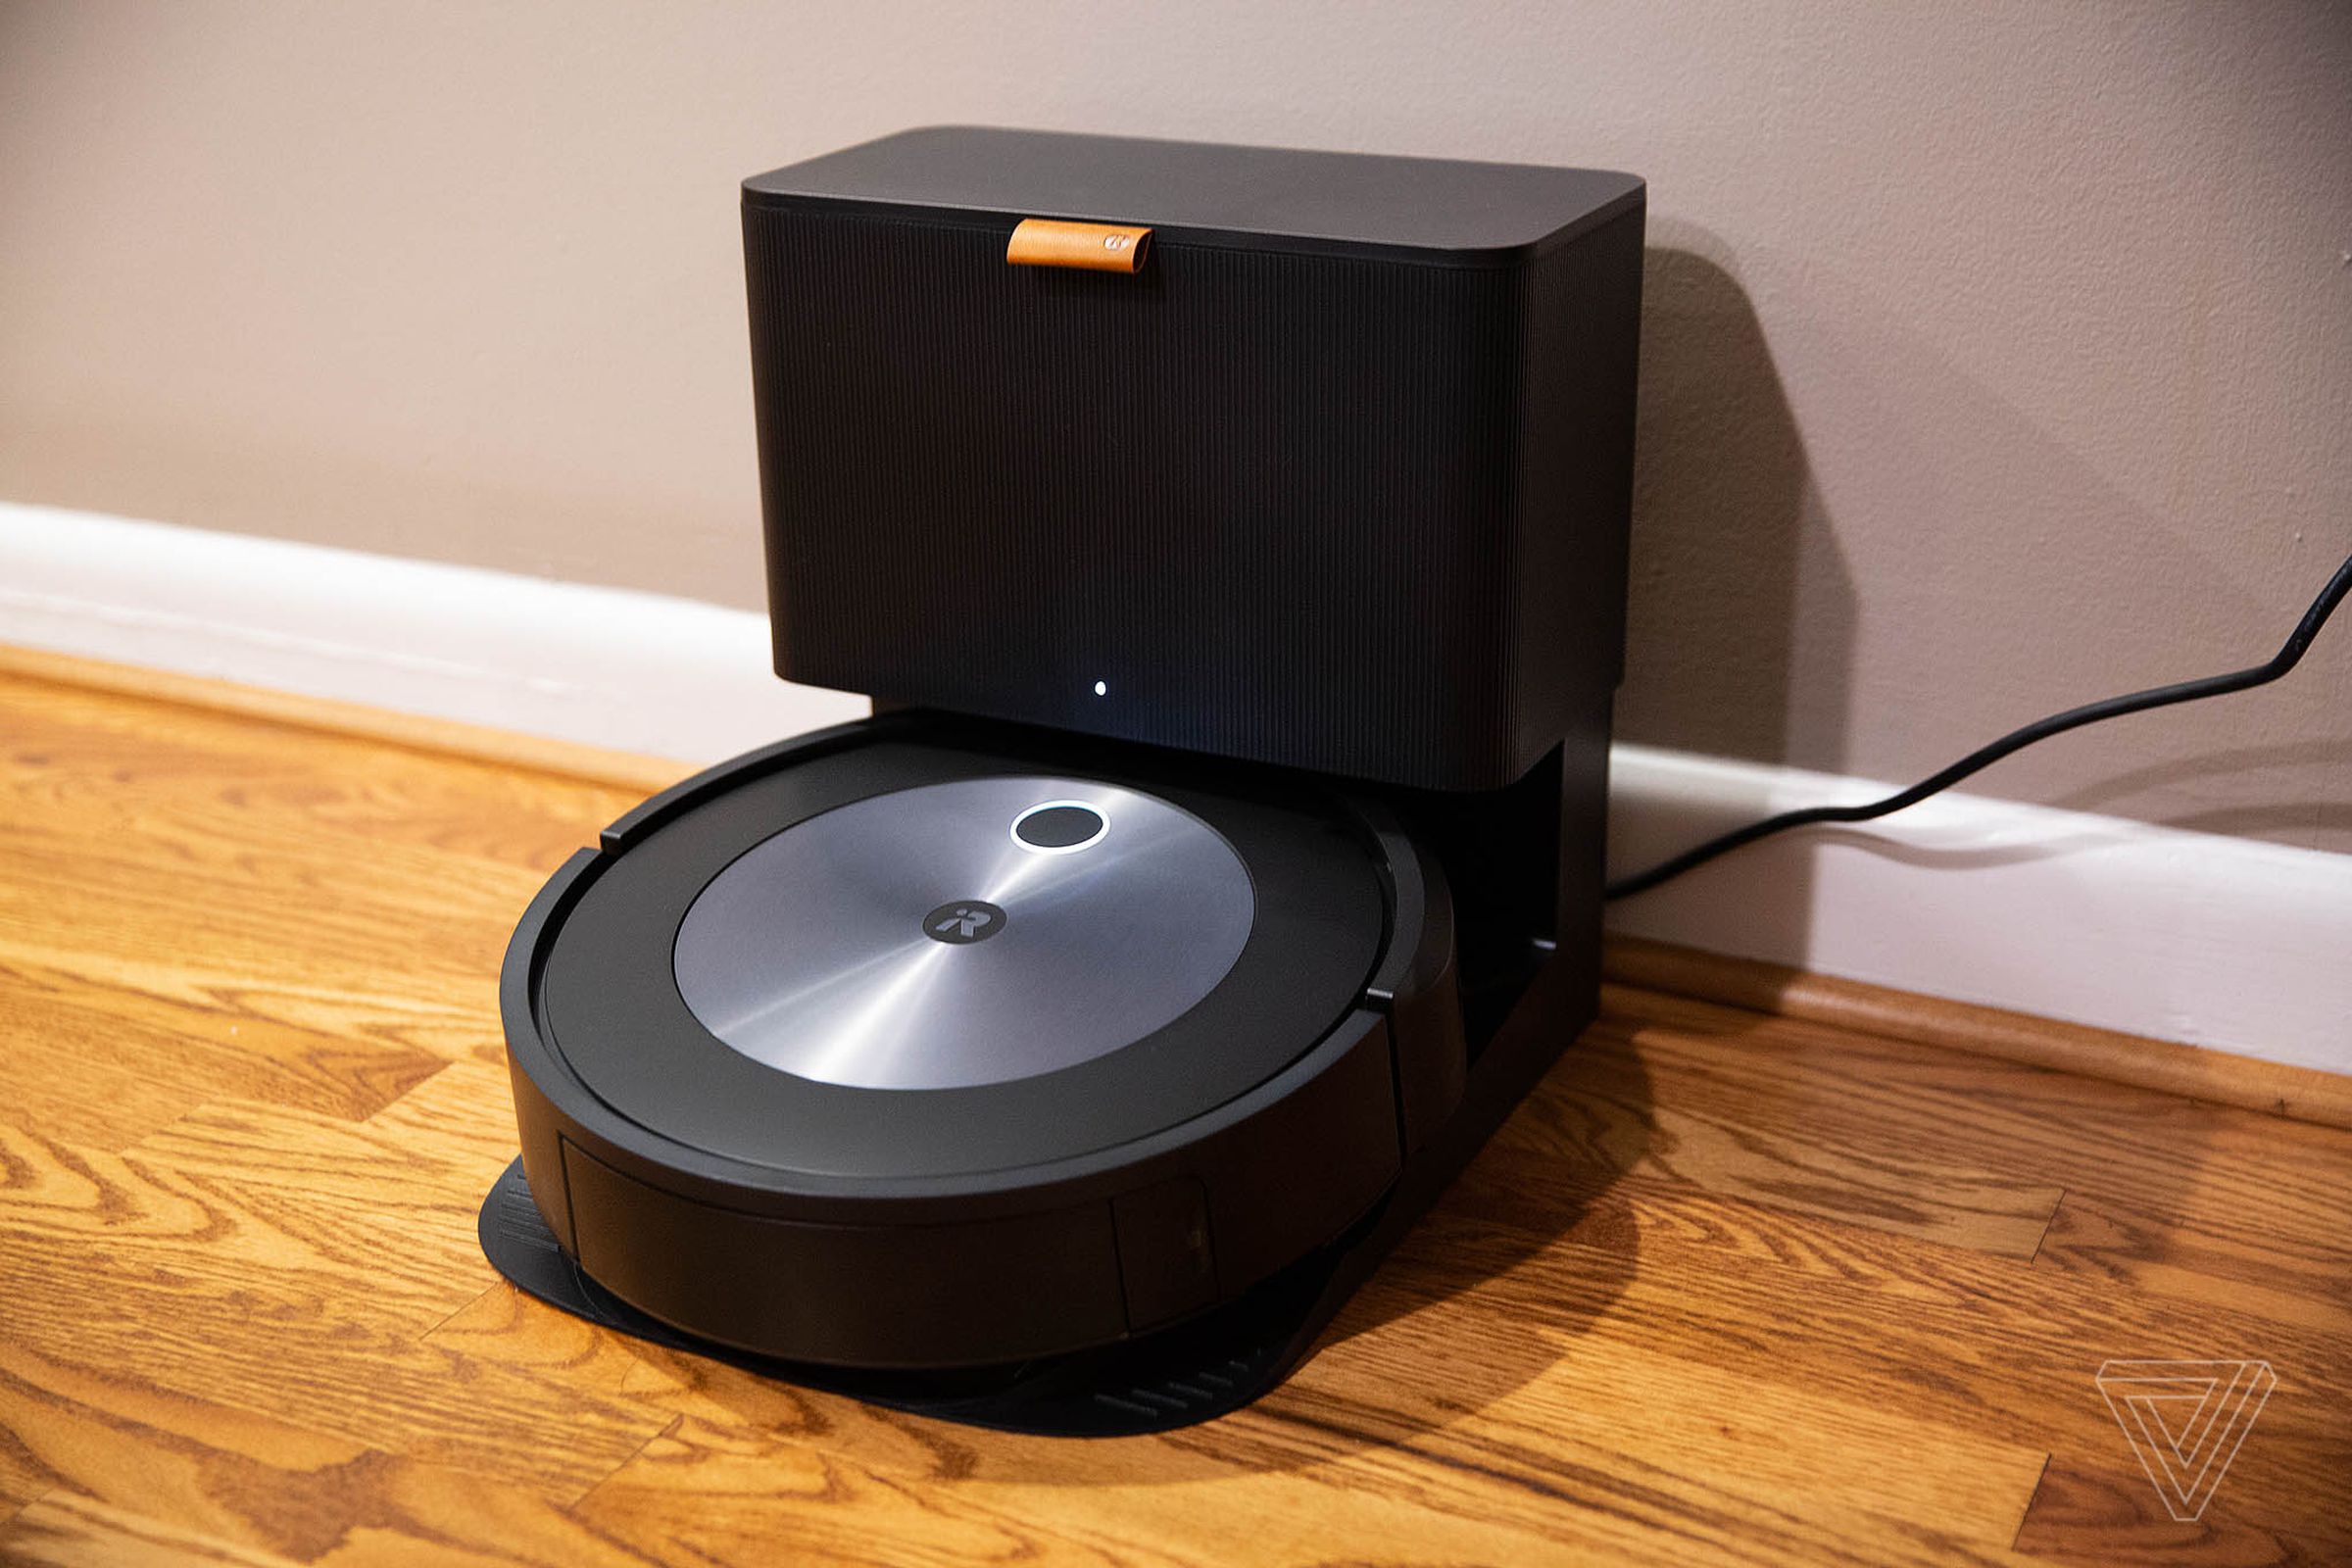 The Roomba j7 is a superb vacuum that looks good (for a vacuum) and works well. You can get the robot on its own or with iRobot’s Clean Base auto-empty dock.